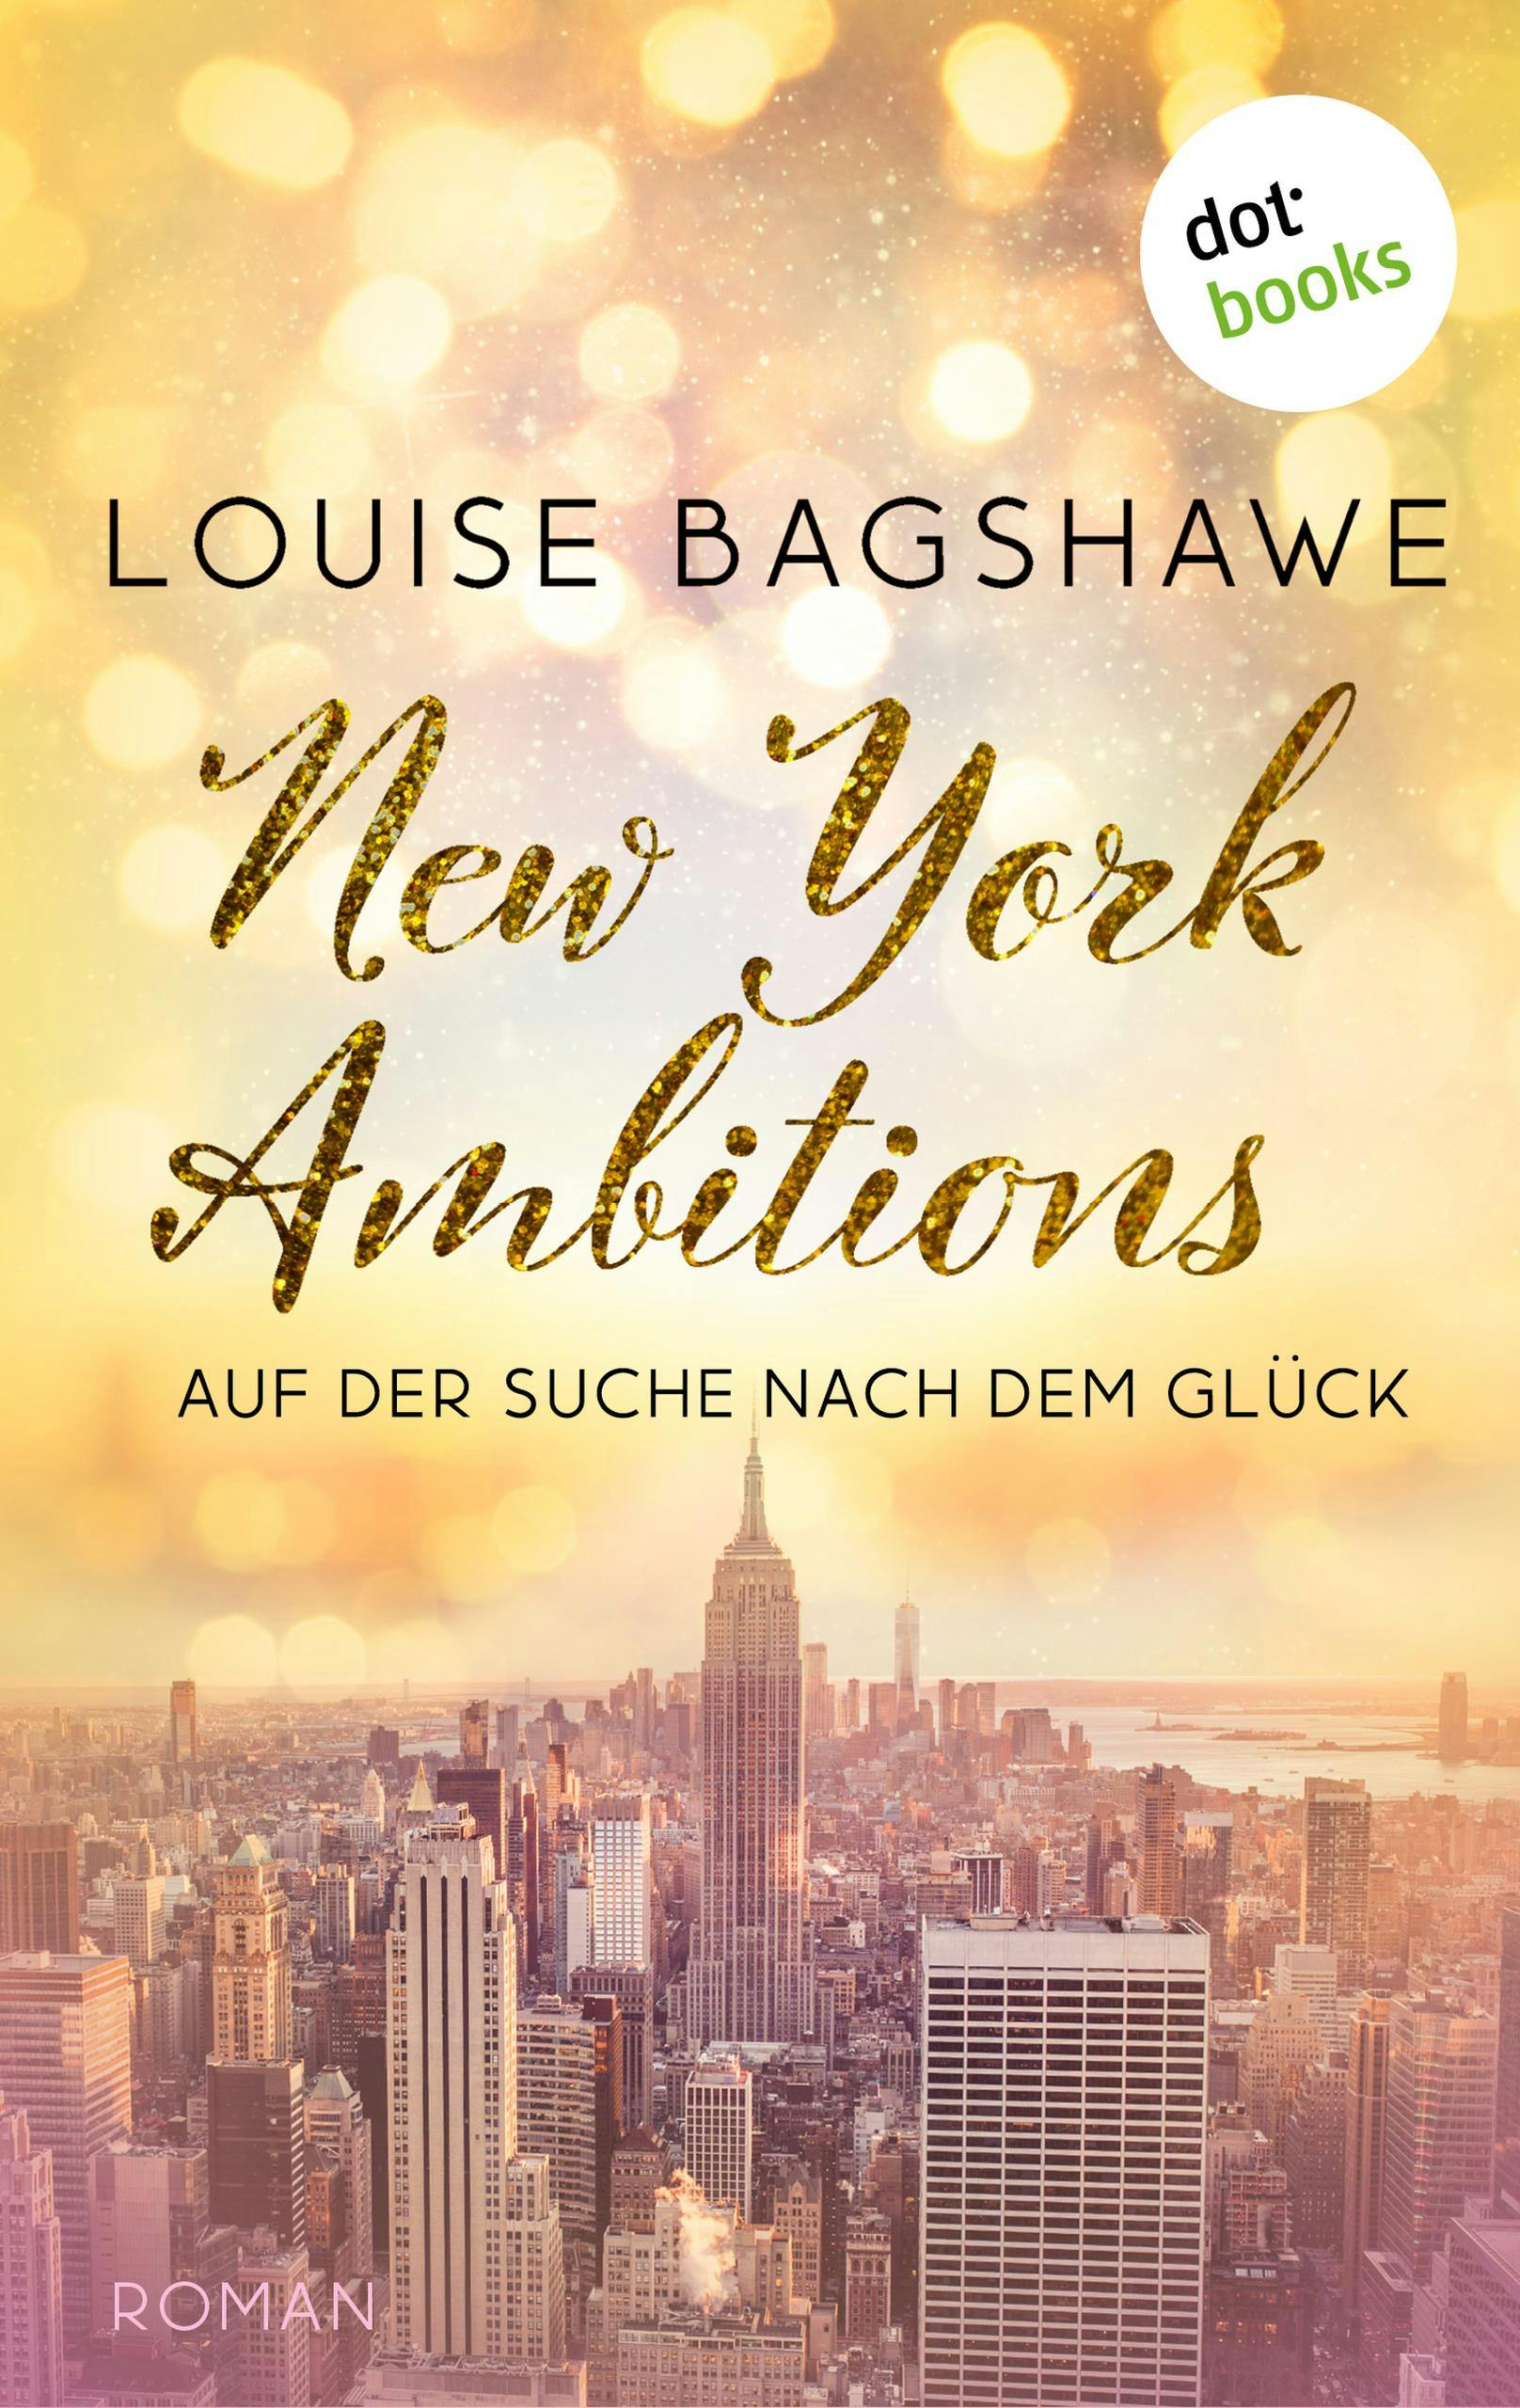 New York Ambitions, E-book, Louise Bagshawe